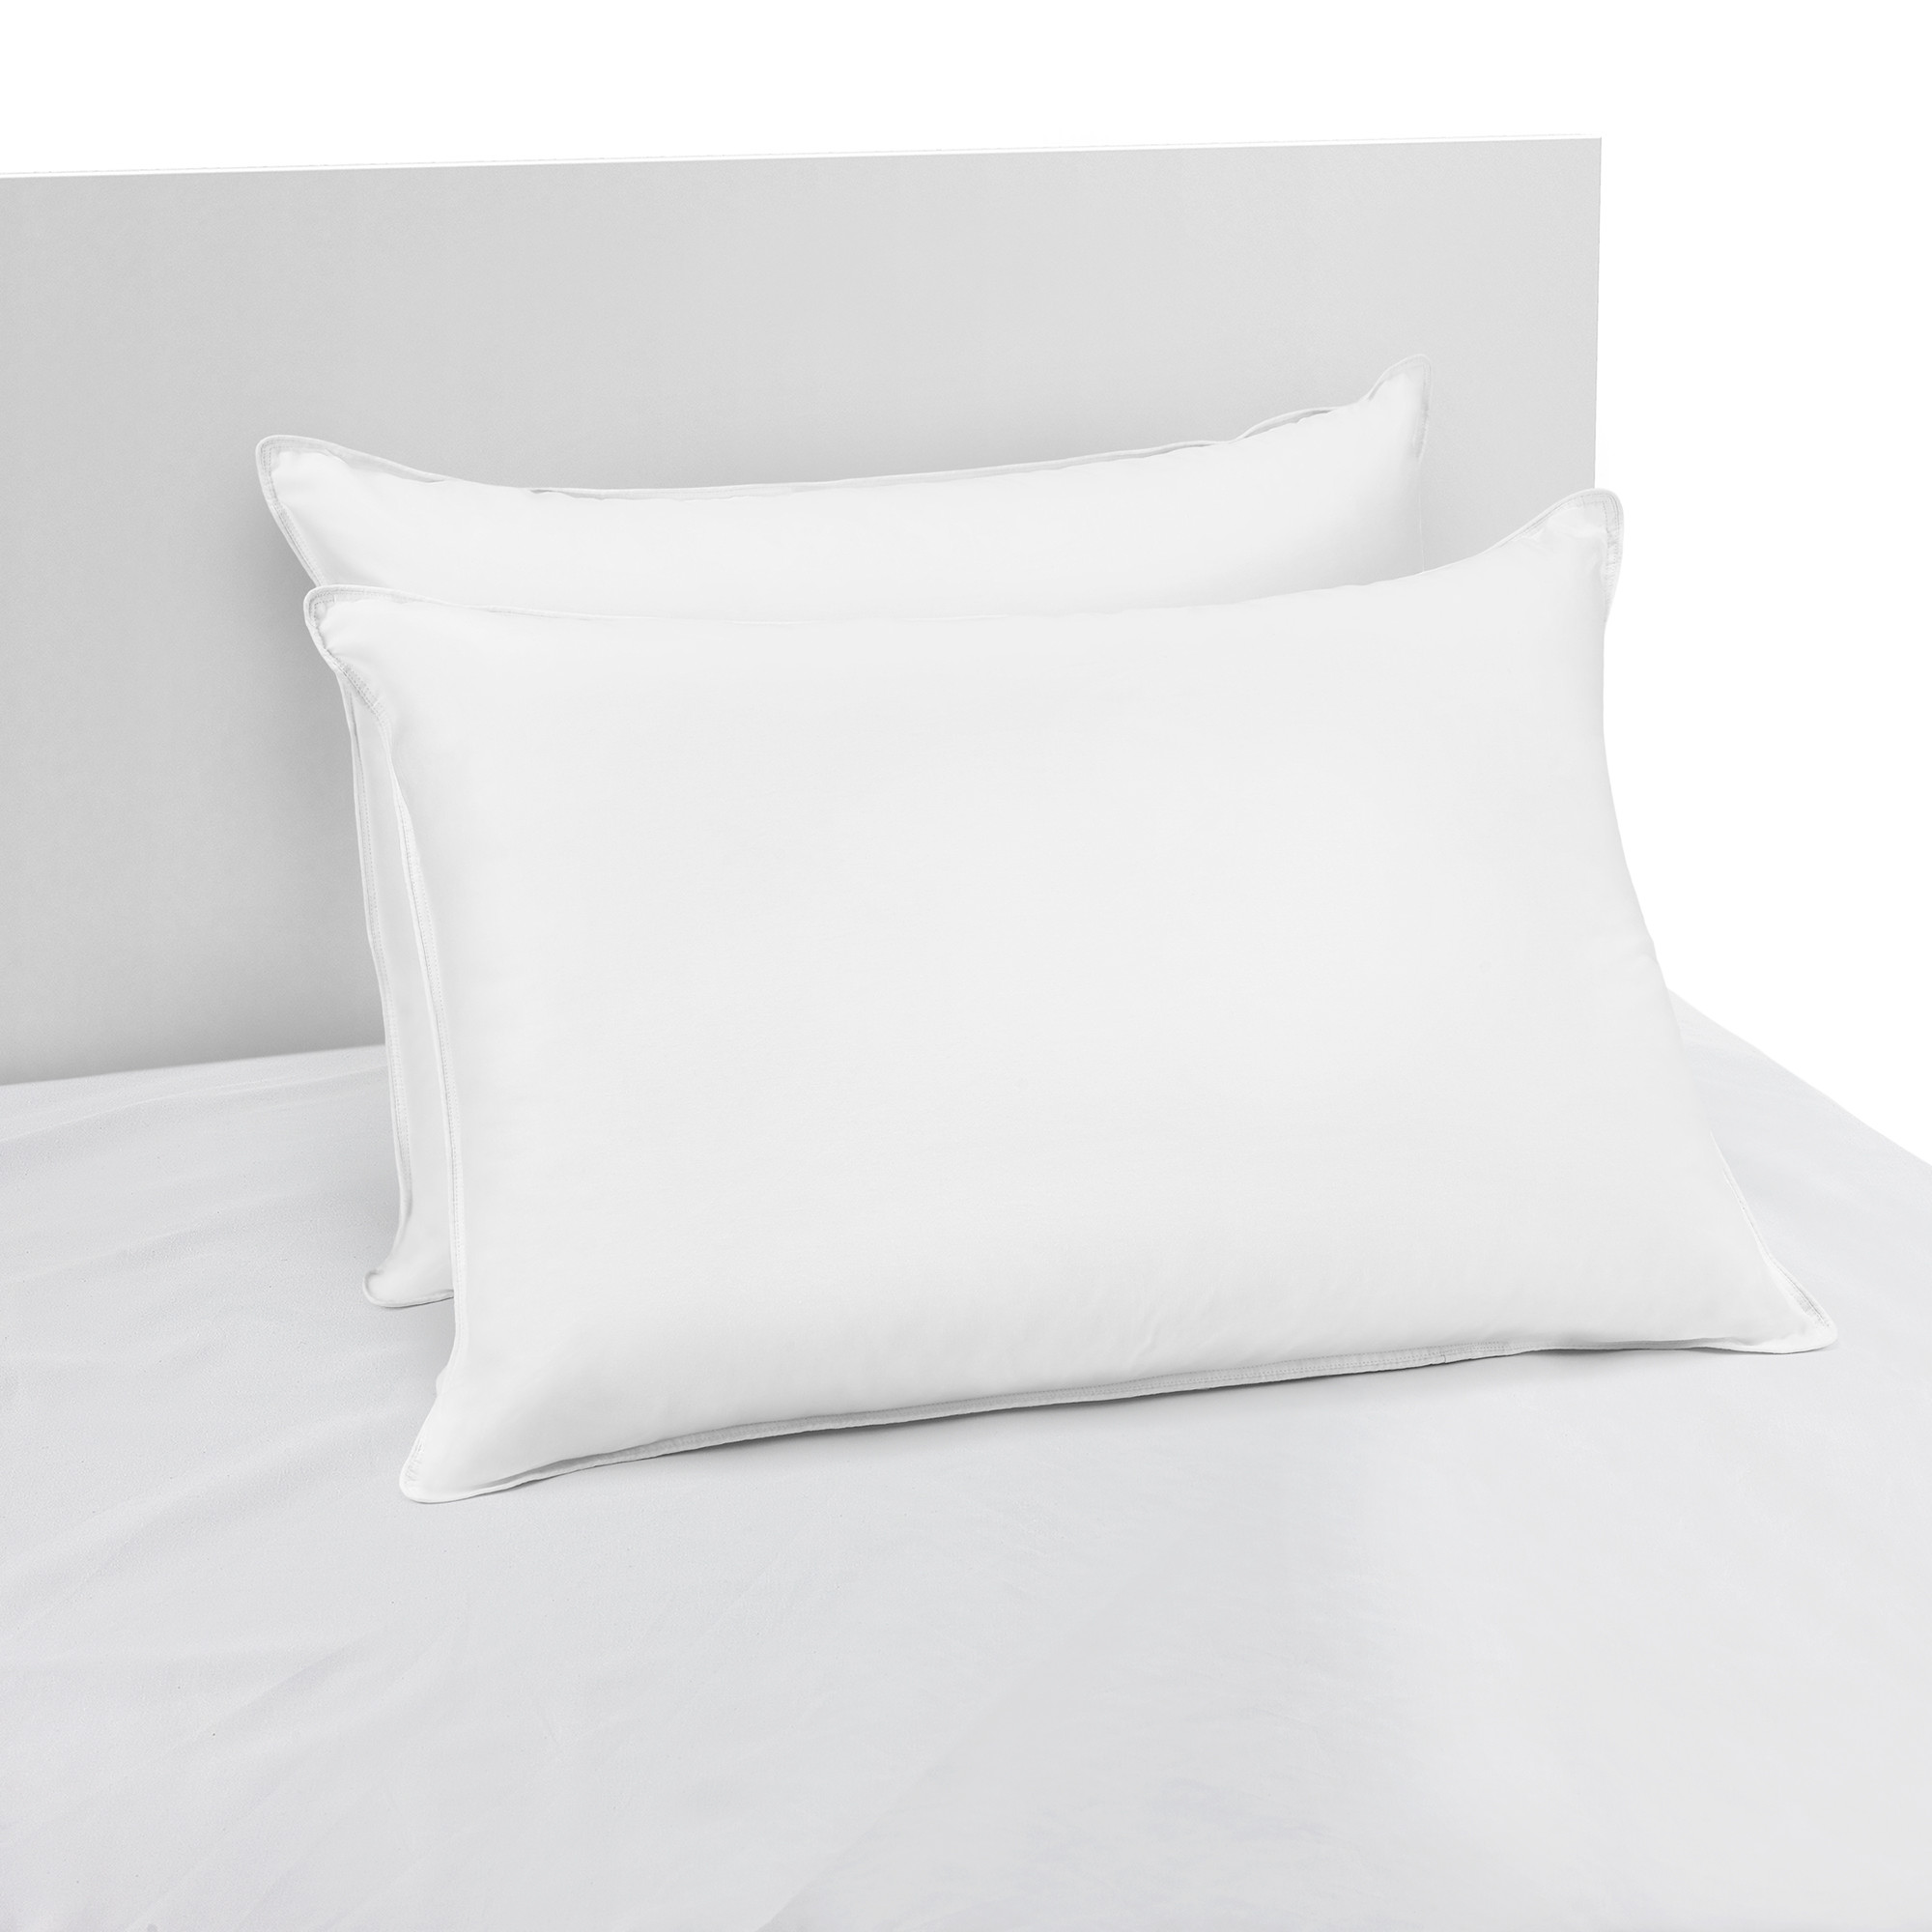 Mainstays 100% Microfiber Pillow Twin Pack in 20" x 26" - image 5 of 8